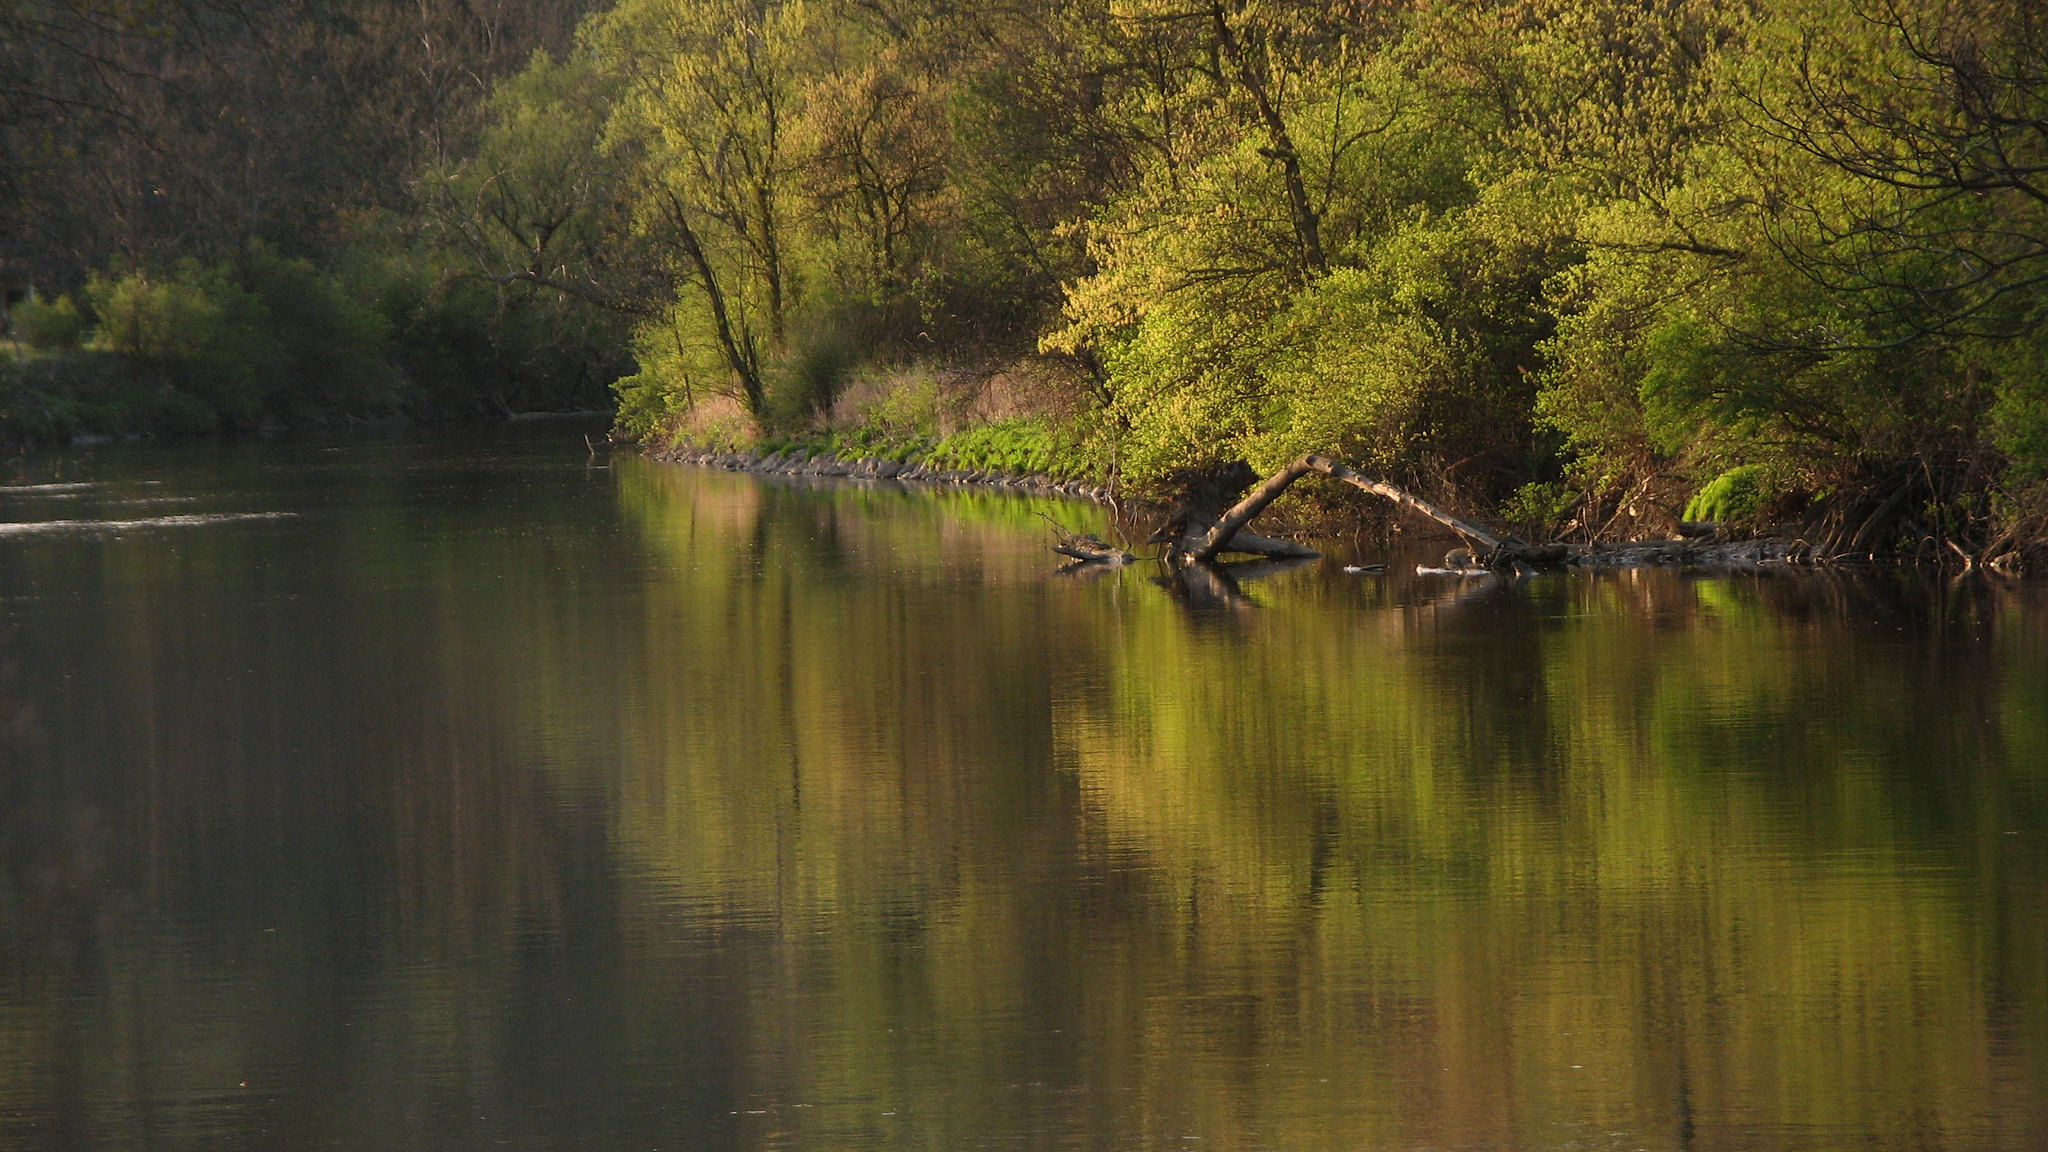 A river with still water reflects the green trees that line one of its banks, all under golden light.